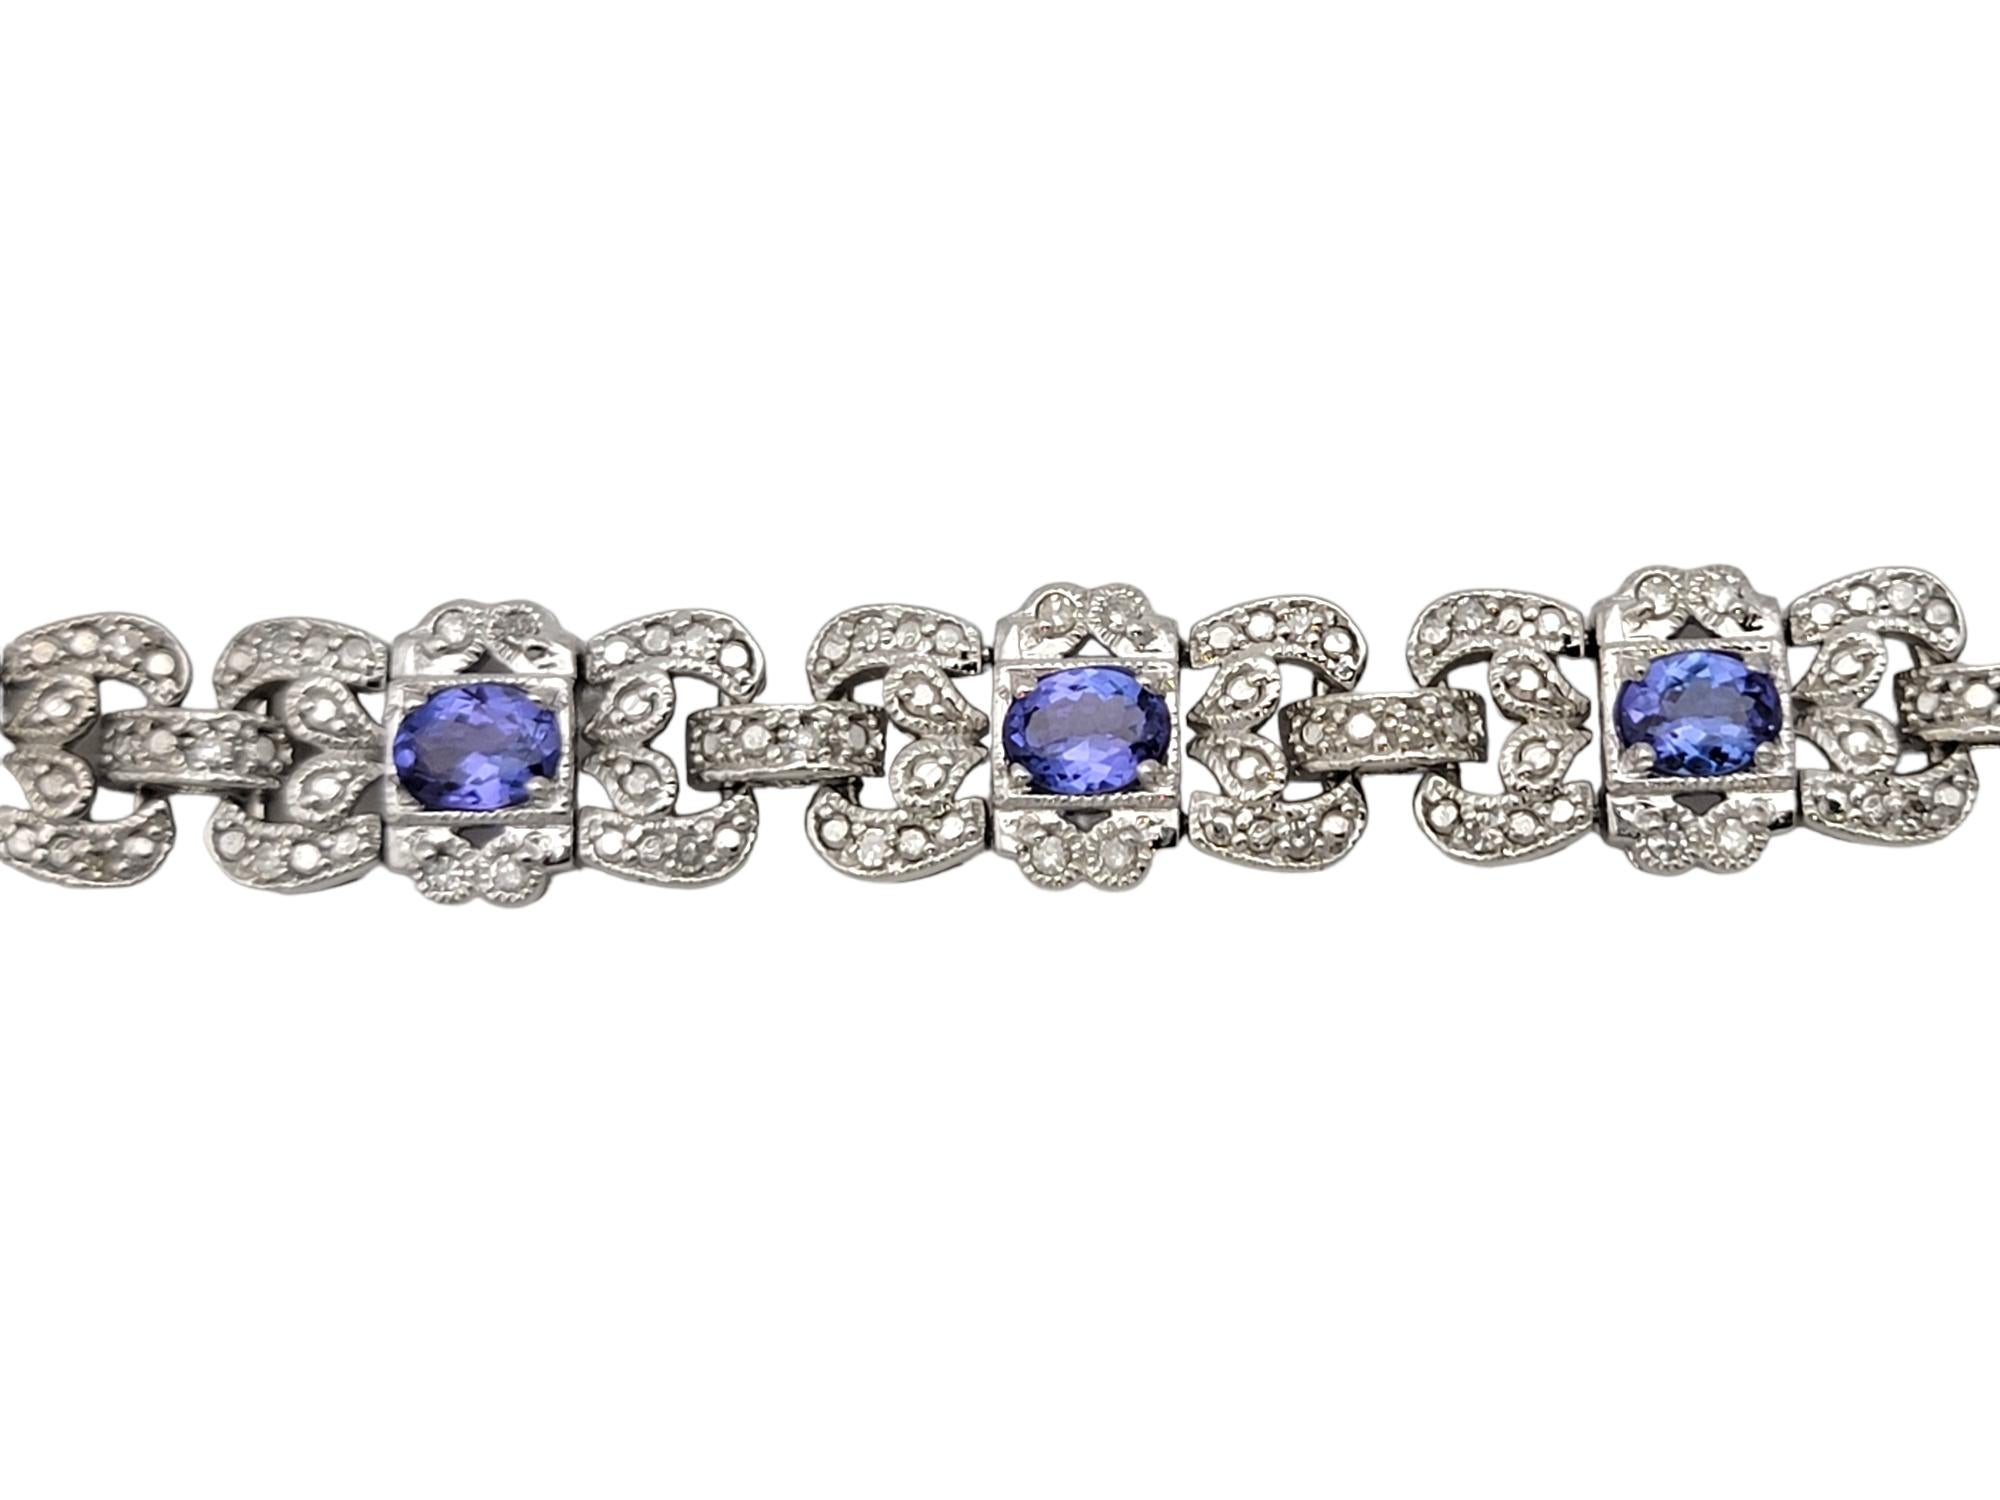 3.30 Carat Total Oval Tanzanite and Pave Diamond Milgrain Bracelet in White Gold In Good Condition For Sale In Scottsdale, AZ